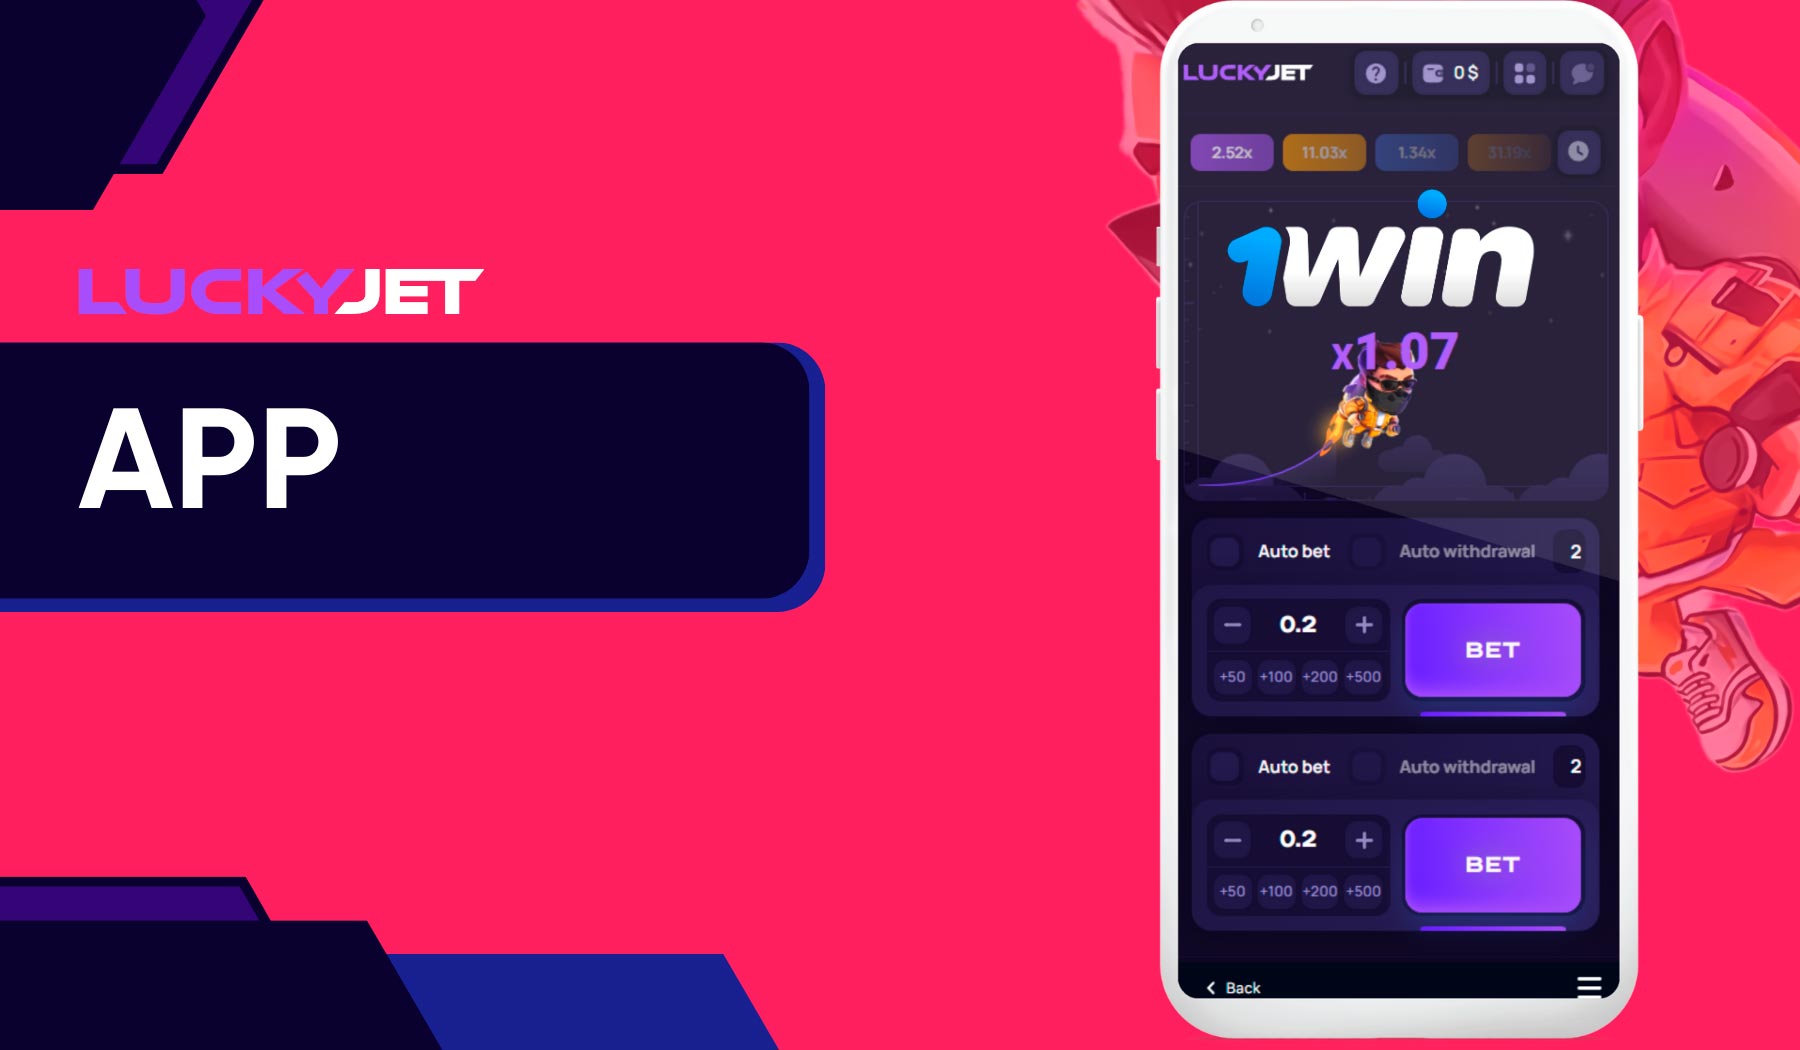 Lucky Jet is also available through the 1win app